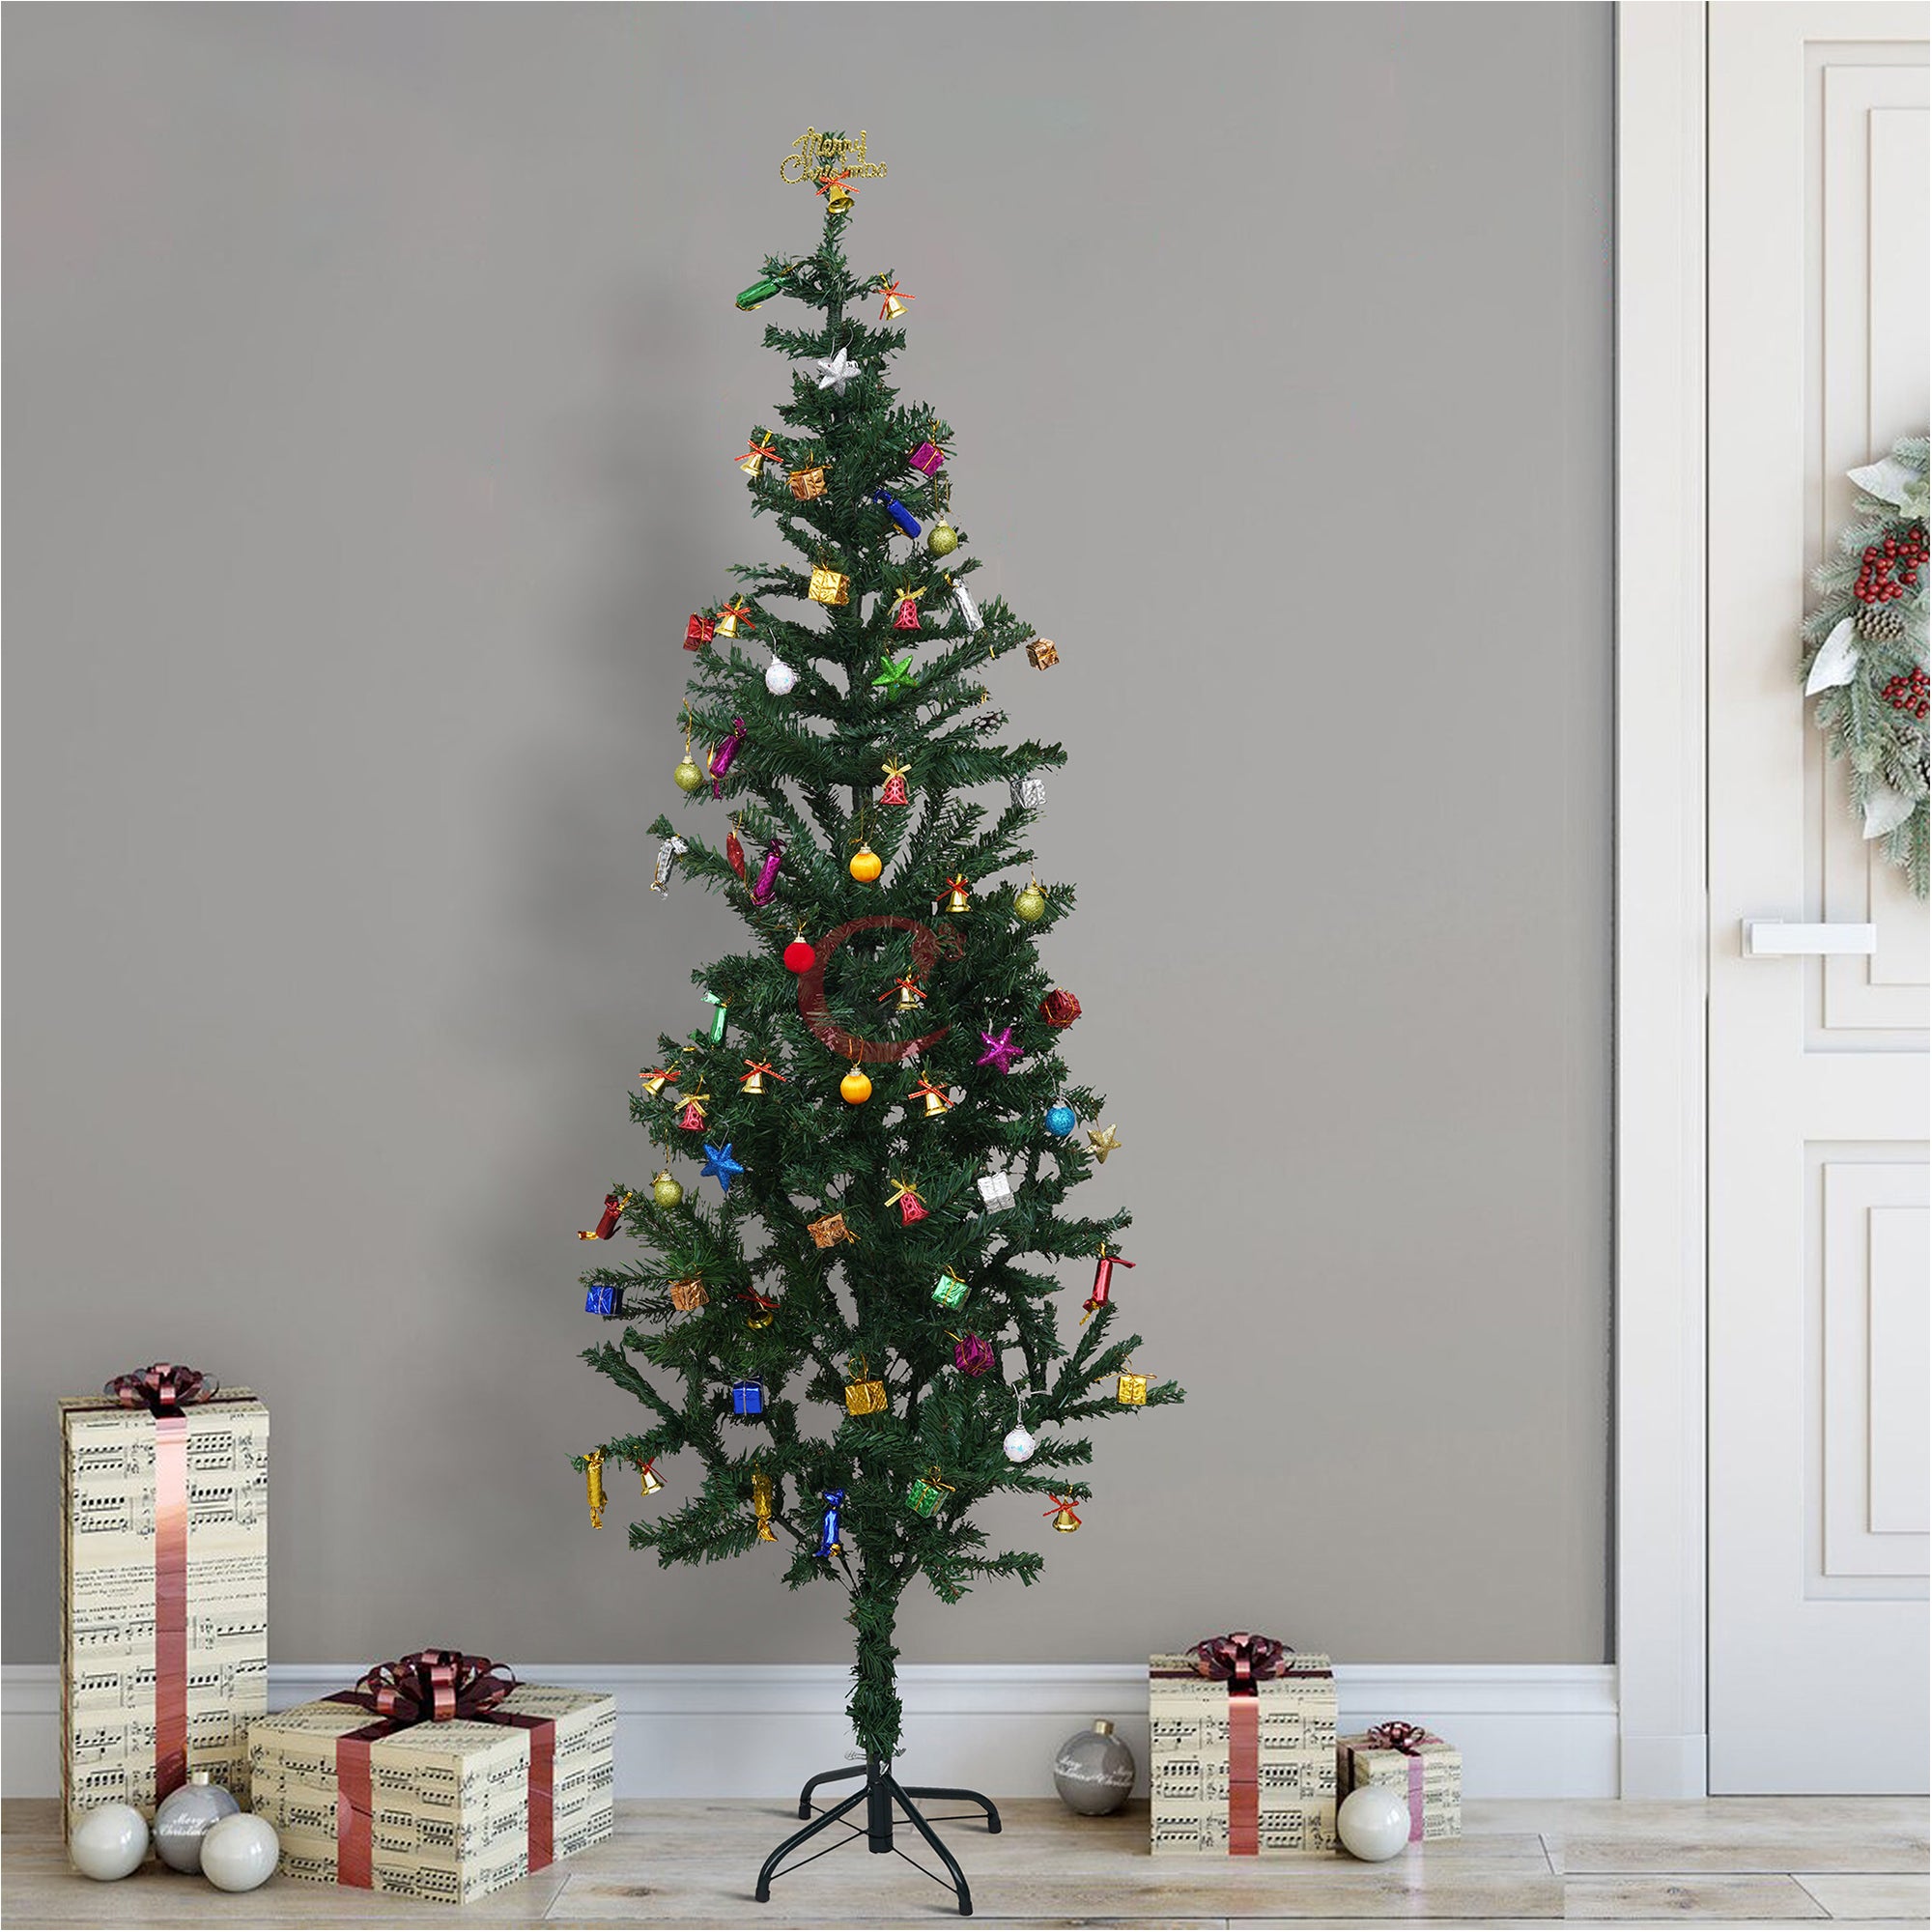 eCraftIndia 5 Feet Green Artificial Christmas Tree Xmas Pine Tree with Metal Stand - Xmas Tree for Indoor, Outdoor, Home, Living Room, Office, Church Decor - Merry Christmas Decoration Item 4